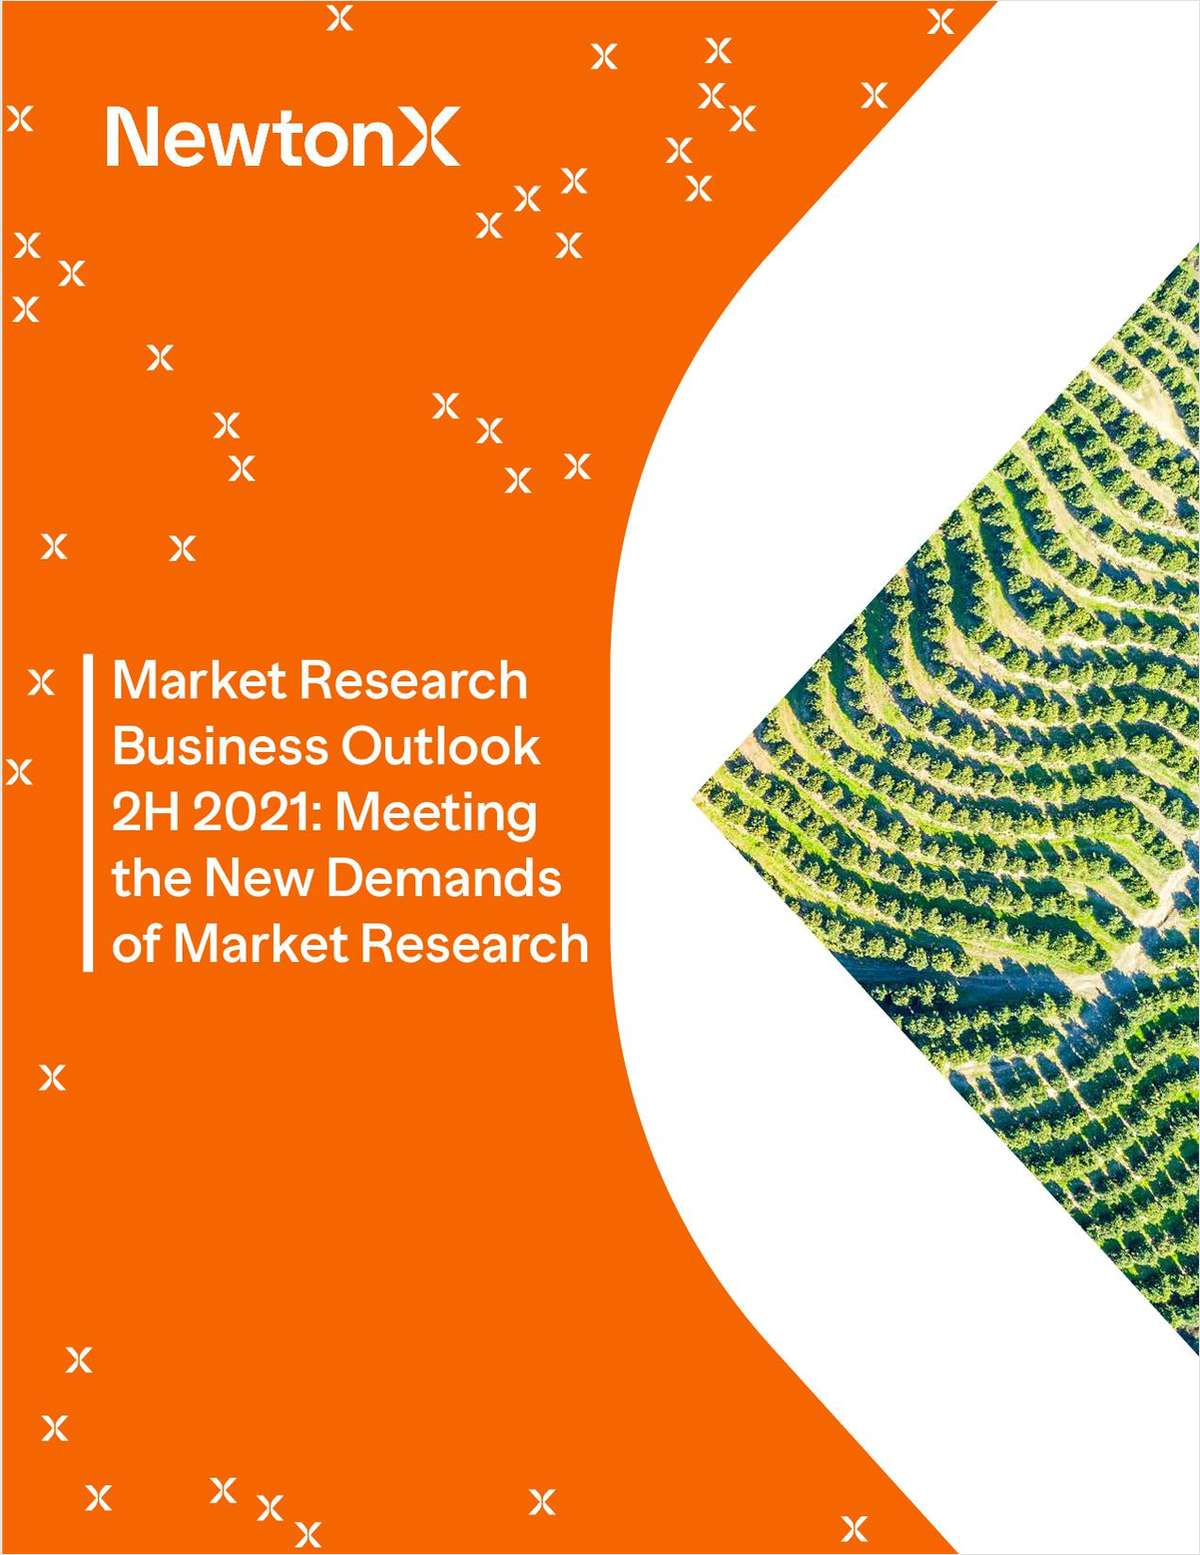 How Research Providers Can Meet the New Demands of B2B Market Research